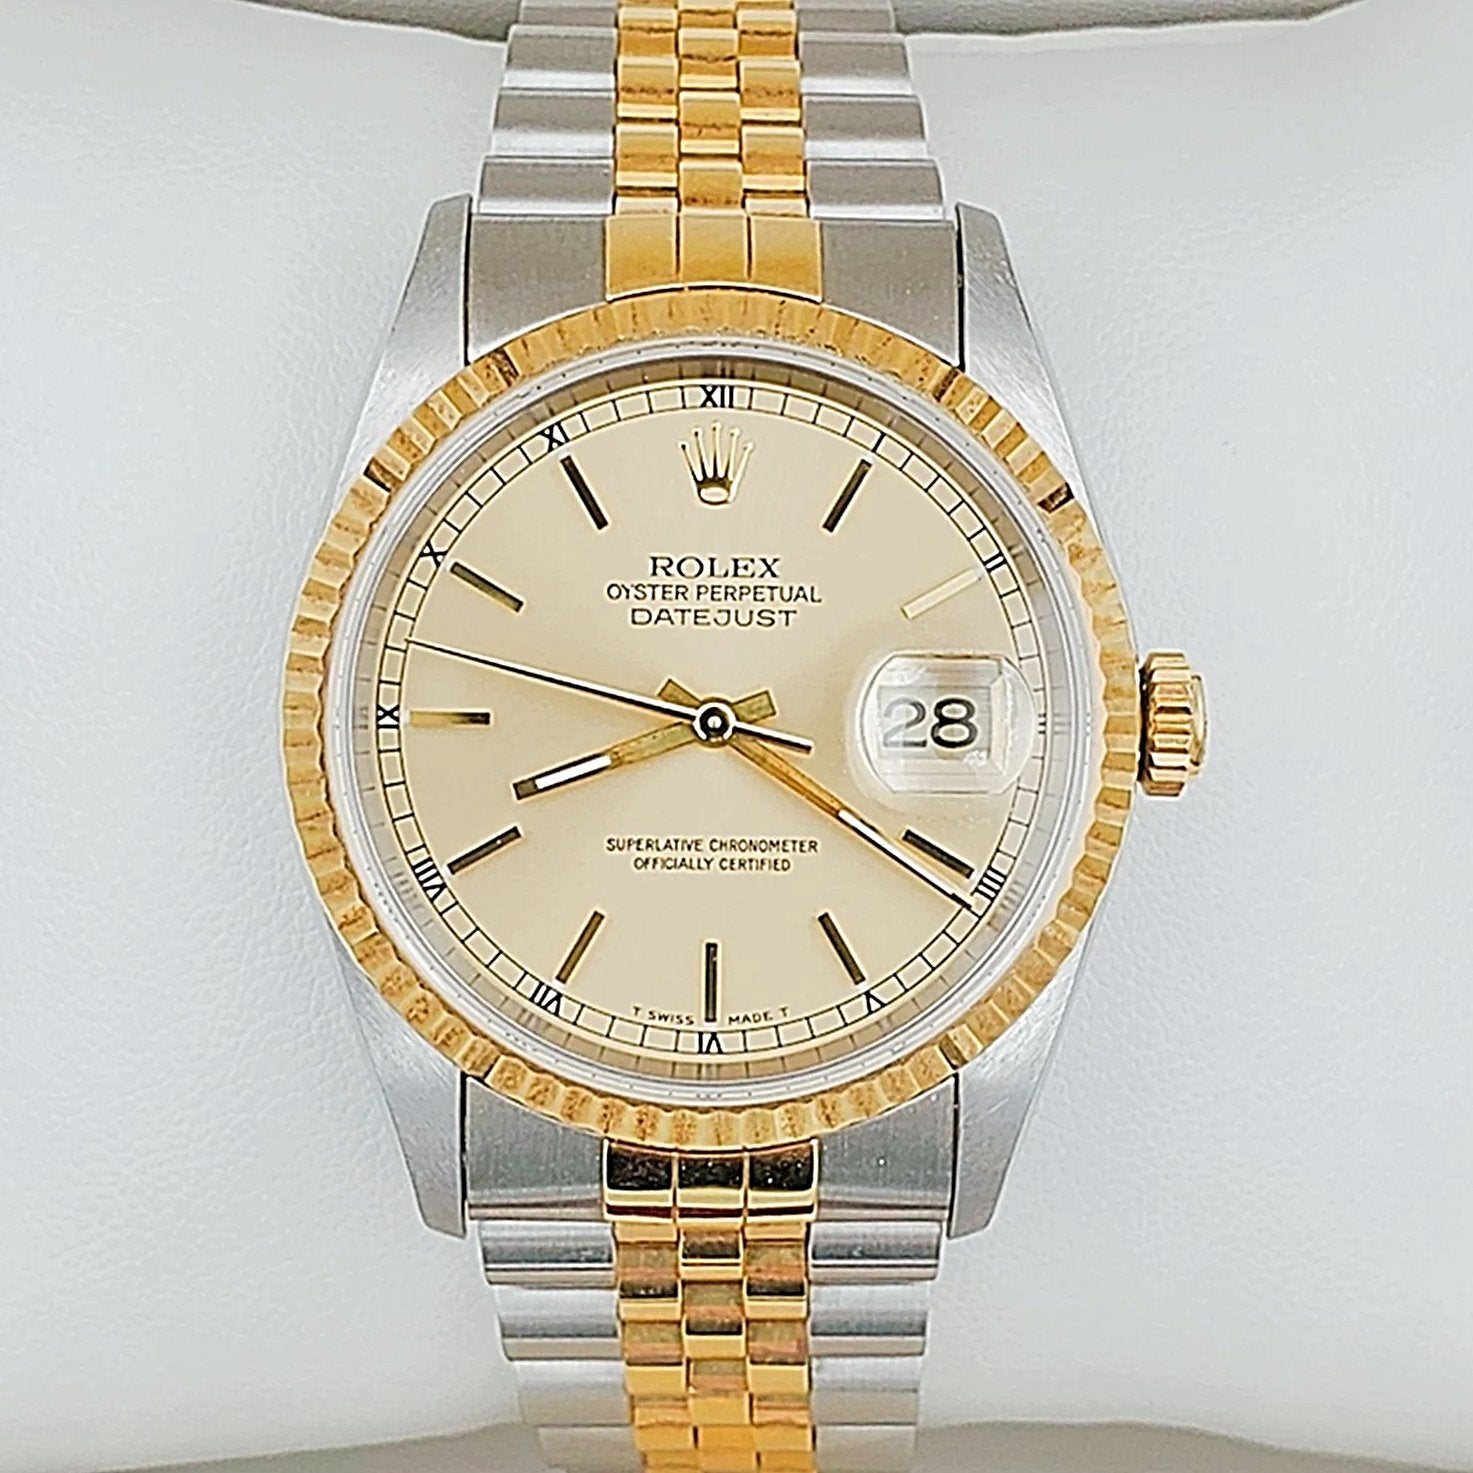 *1998 Men's Rolex 36mm DateJust 18K Gold / Stainless Steel Two Tone Watch with Champagne Dial and Fluted Bezel. (UNWORN 16233)